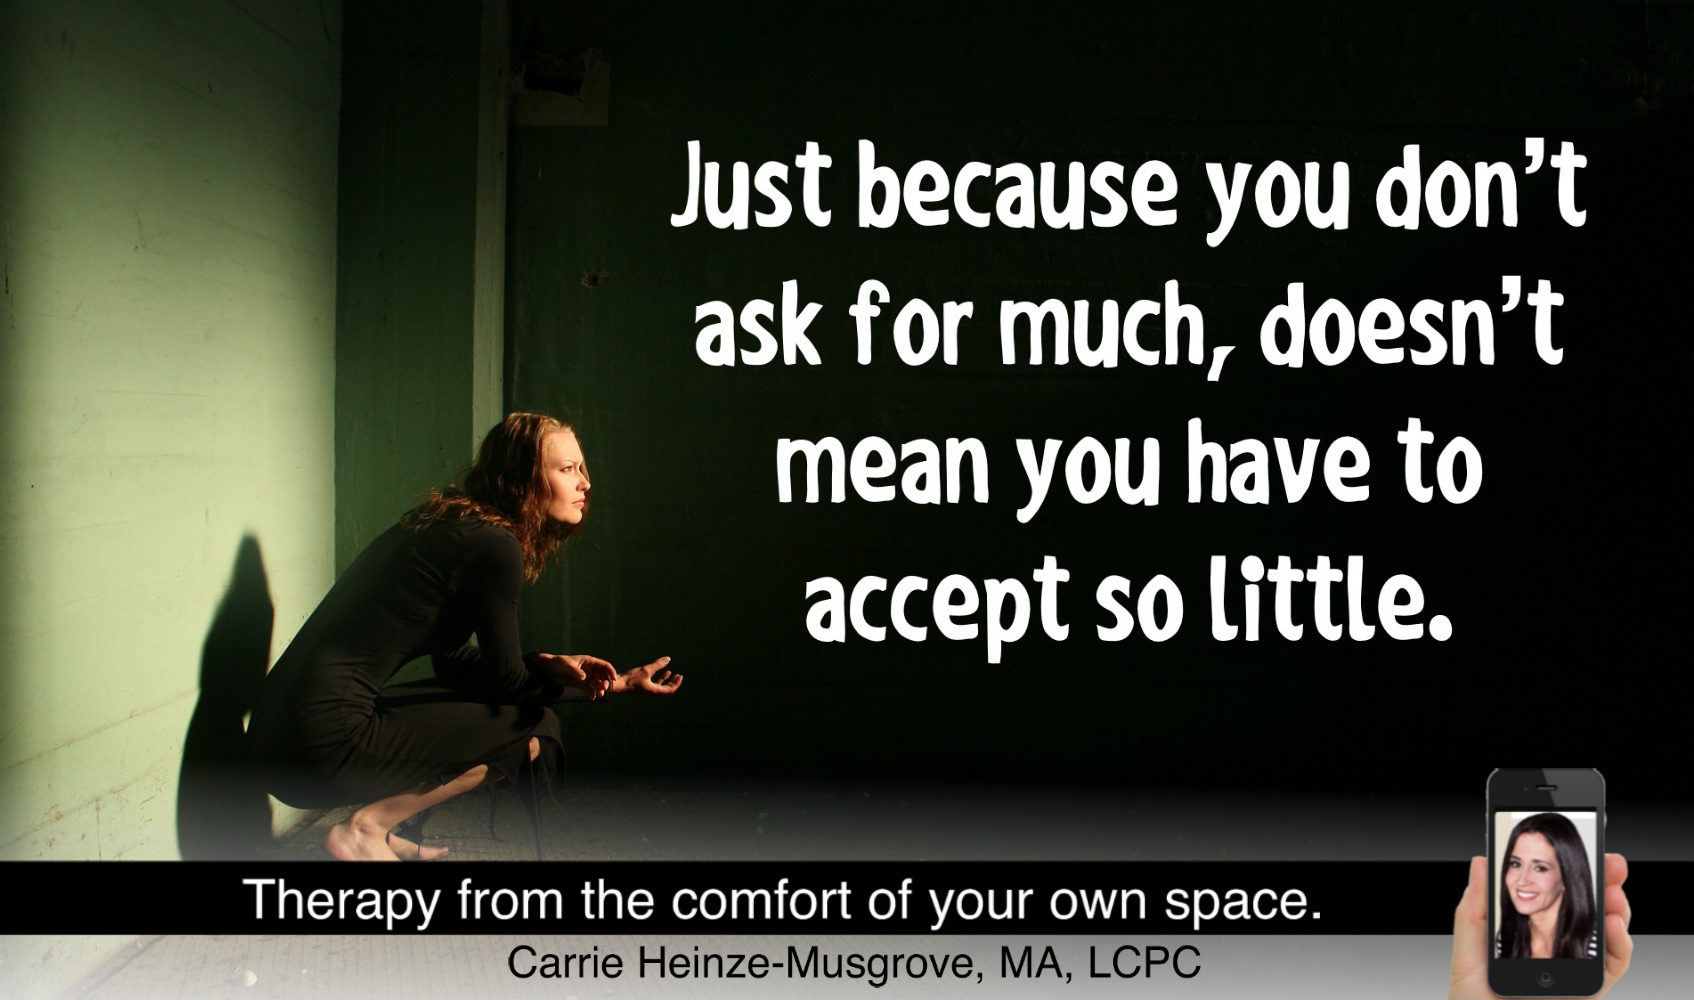 Just because you don’t ask for much doesn’t mean you have to accept so little.